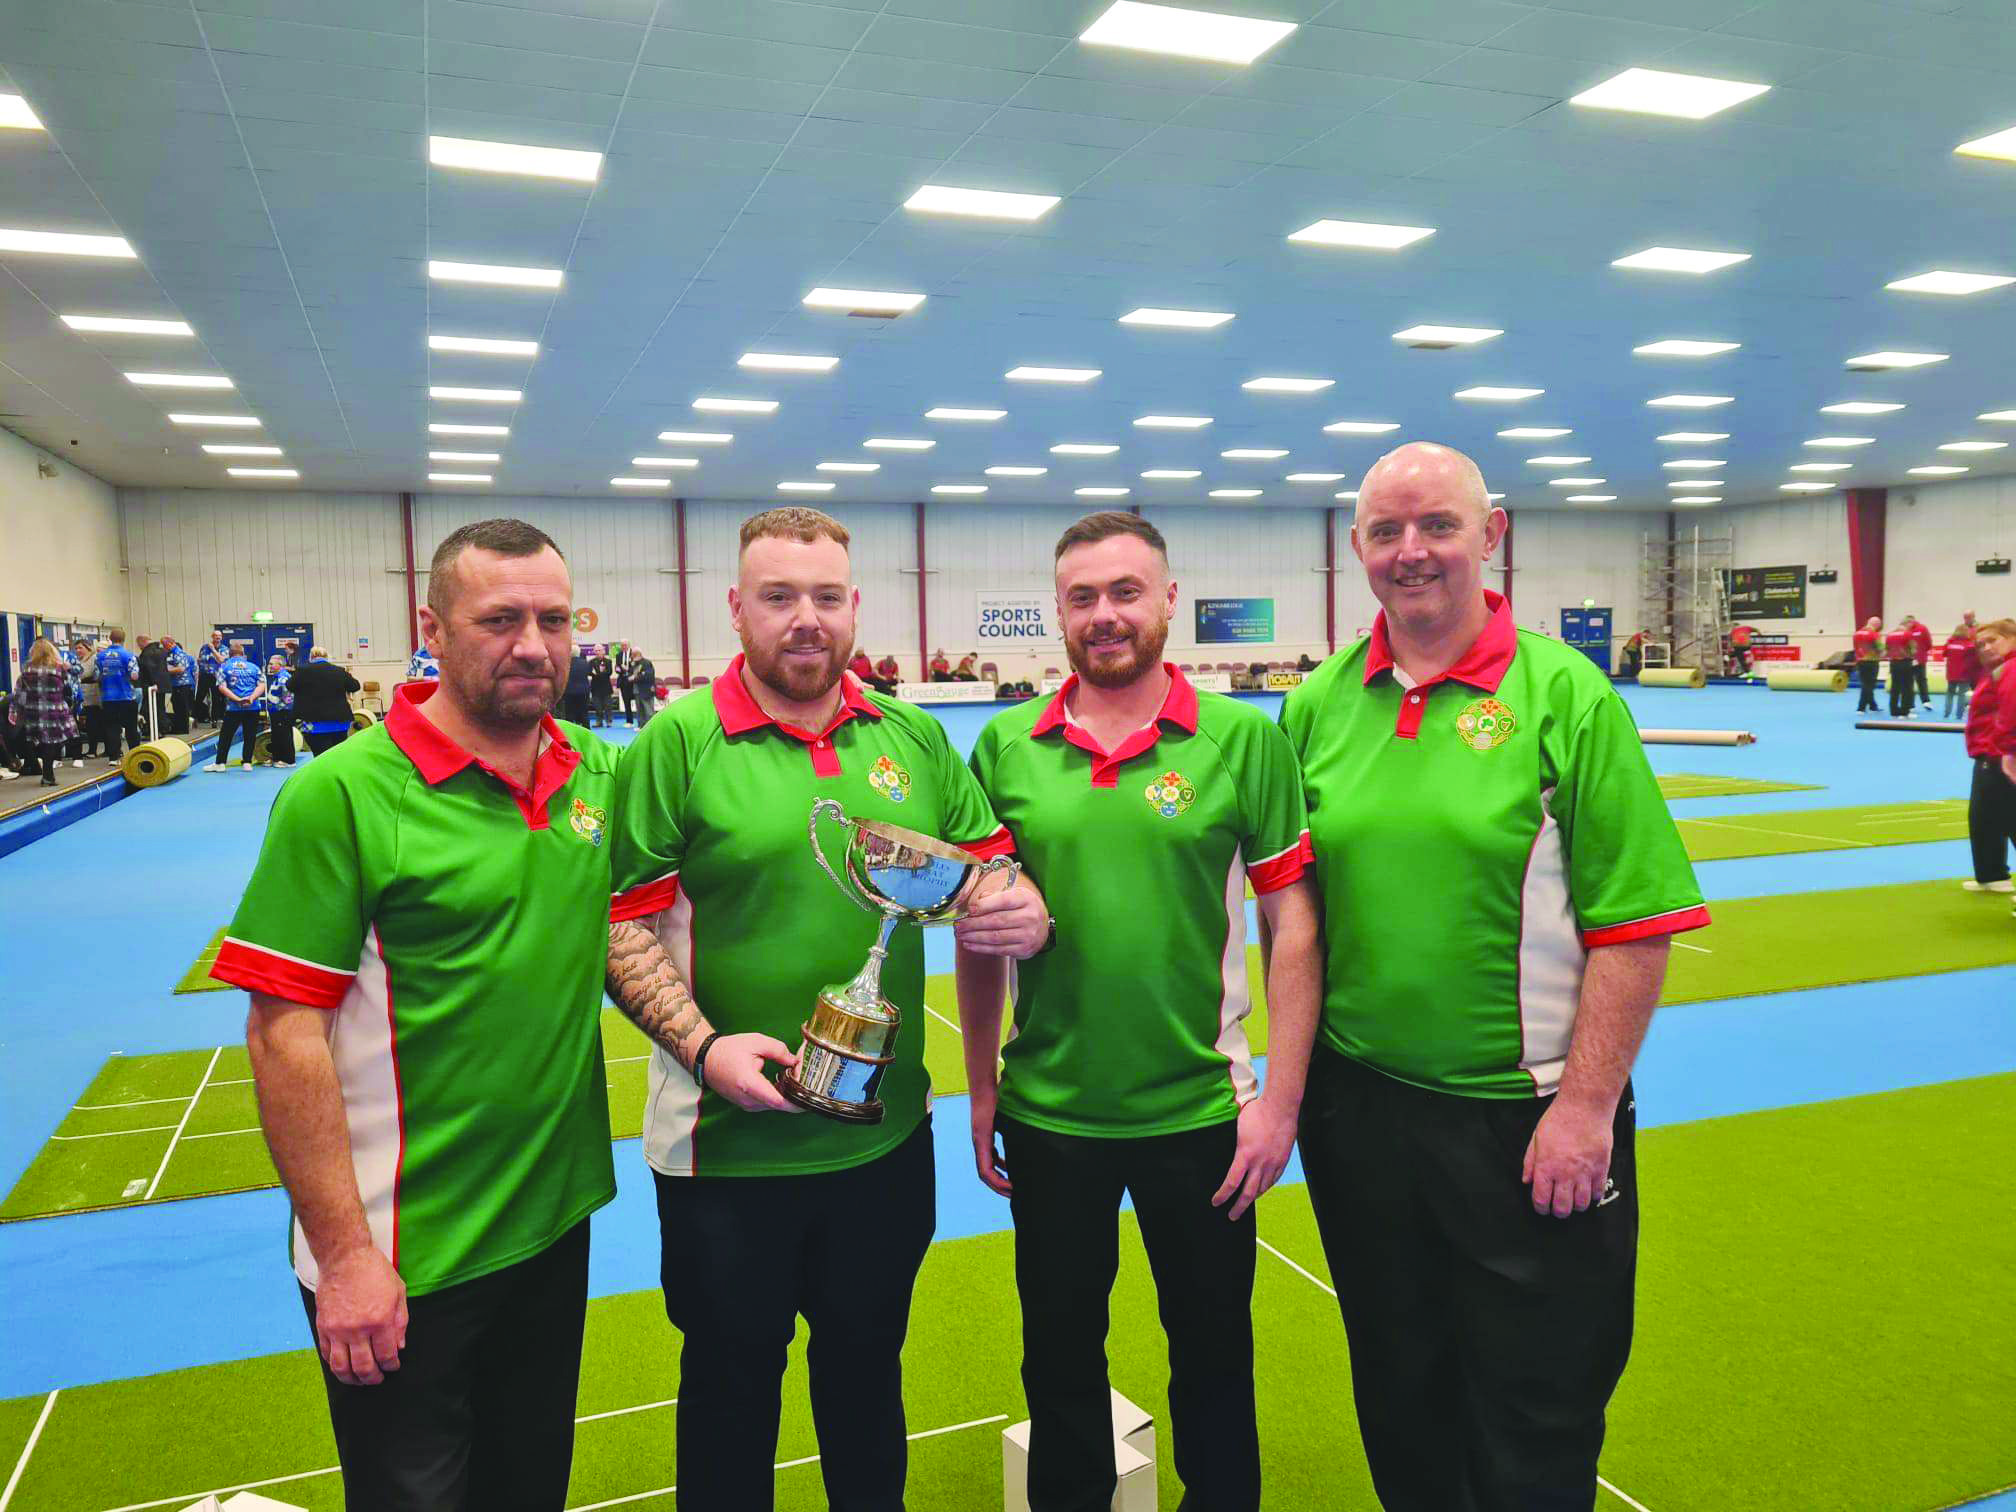 Gerard McCloskey, Nathan Haire, Nick Haire and Terry Crawford after winning the British Isles Championships